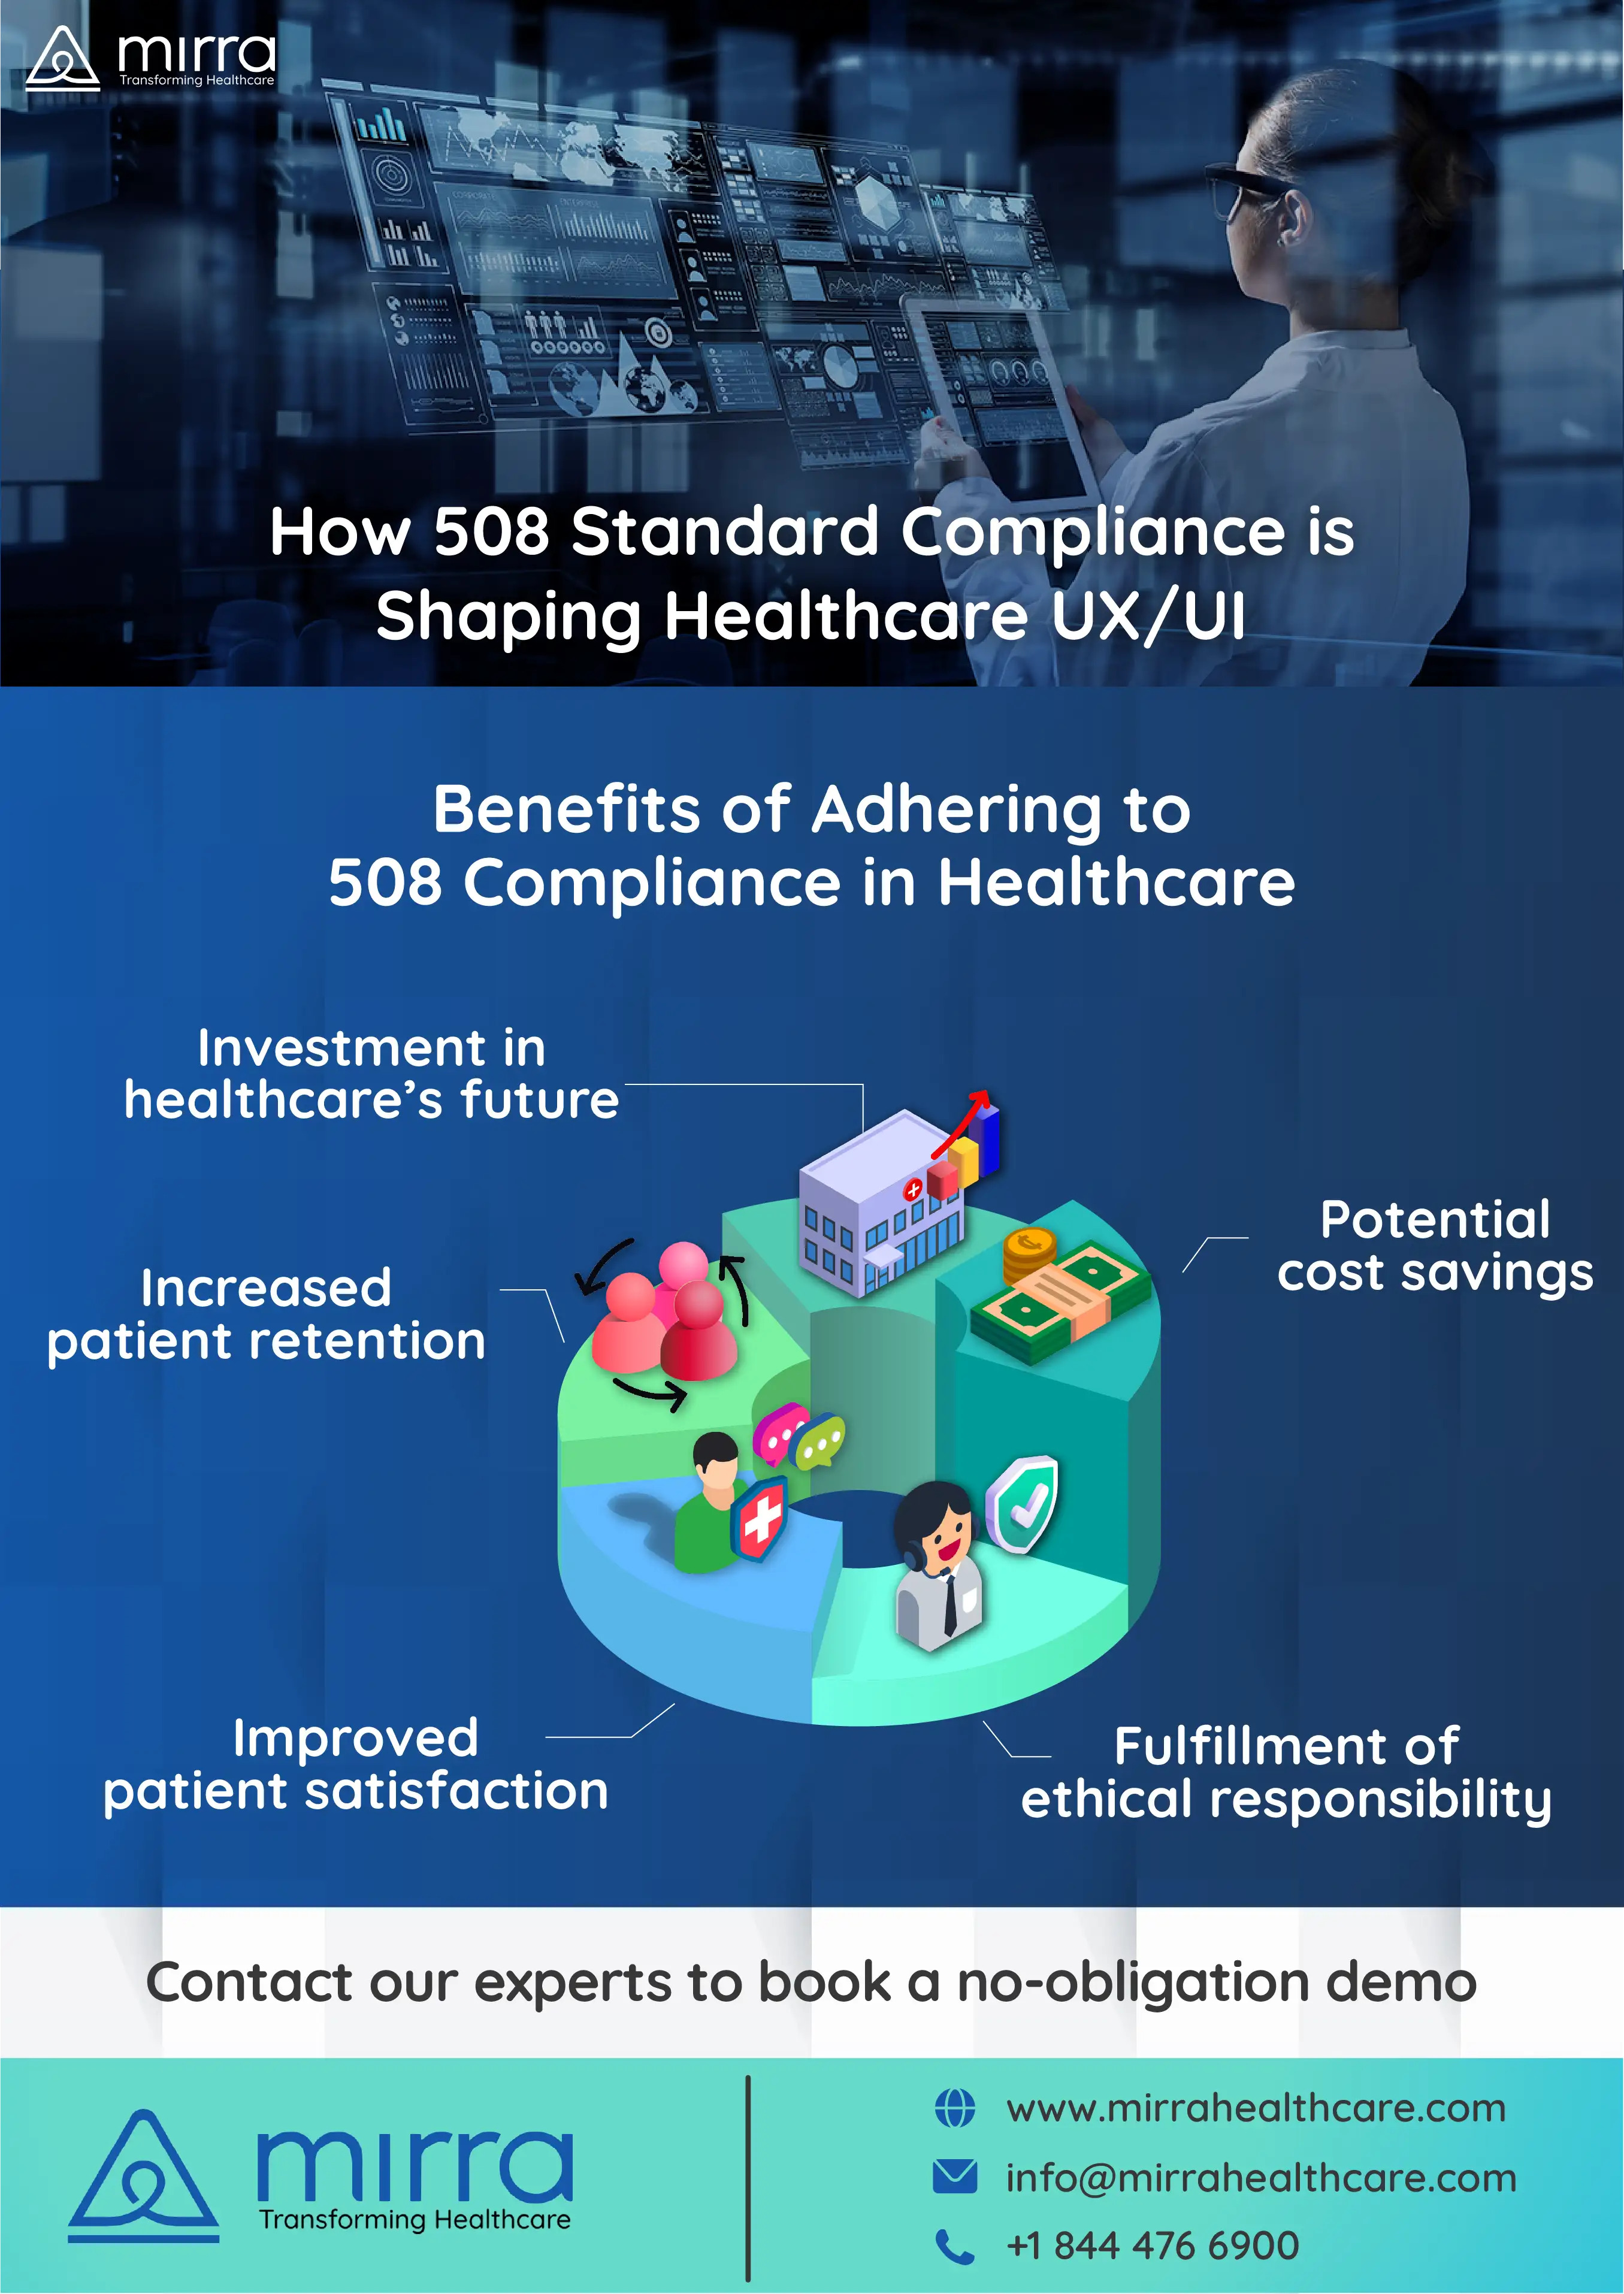 How 508 Standard Compliance is Shaping Healthcare UI/UX